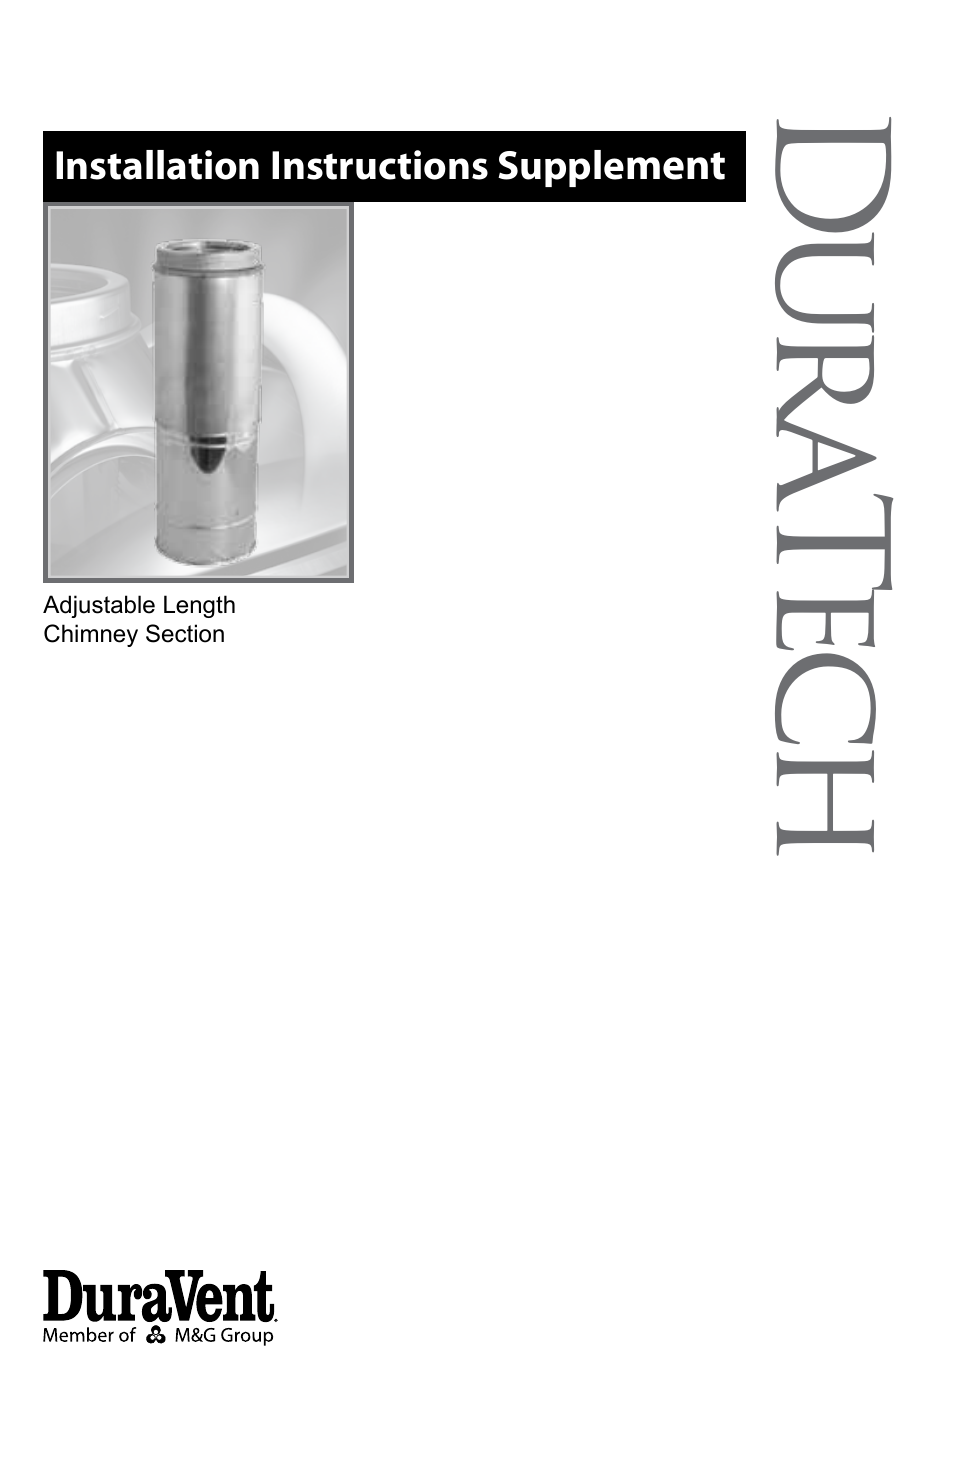 DuraTech Adjustable Length